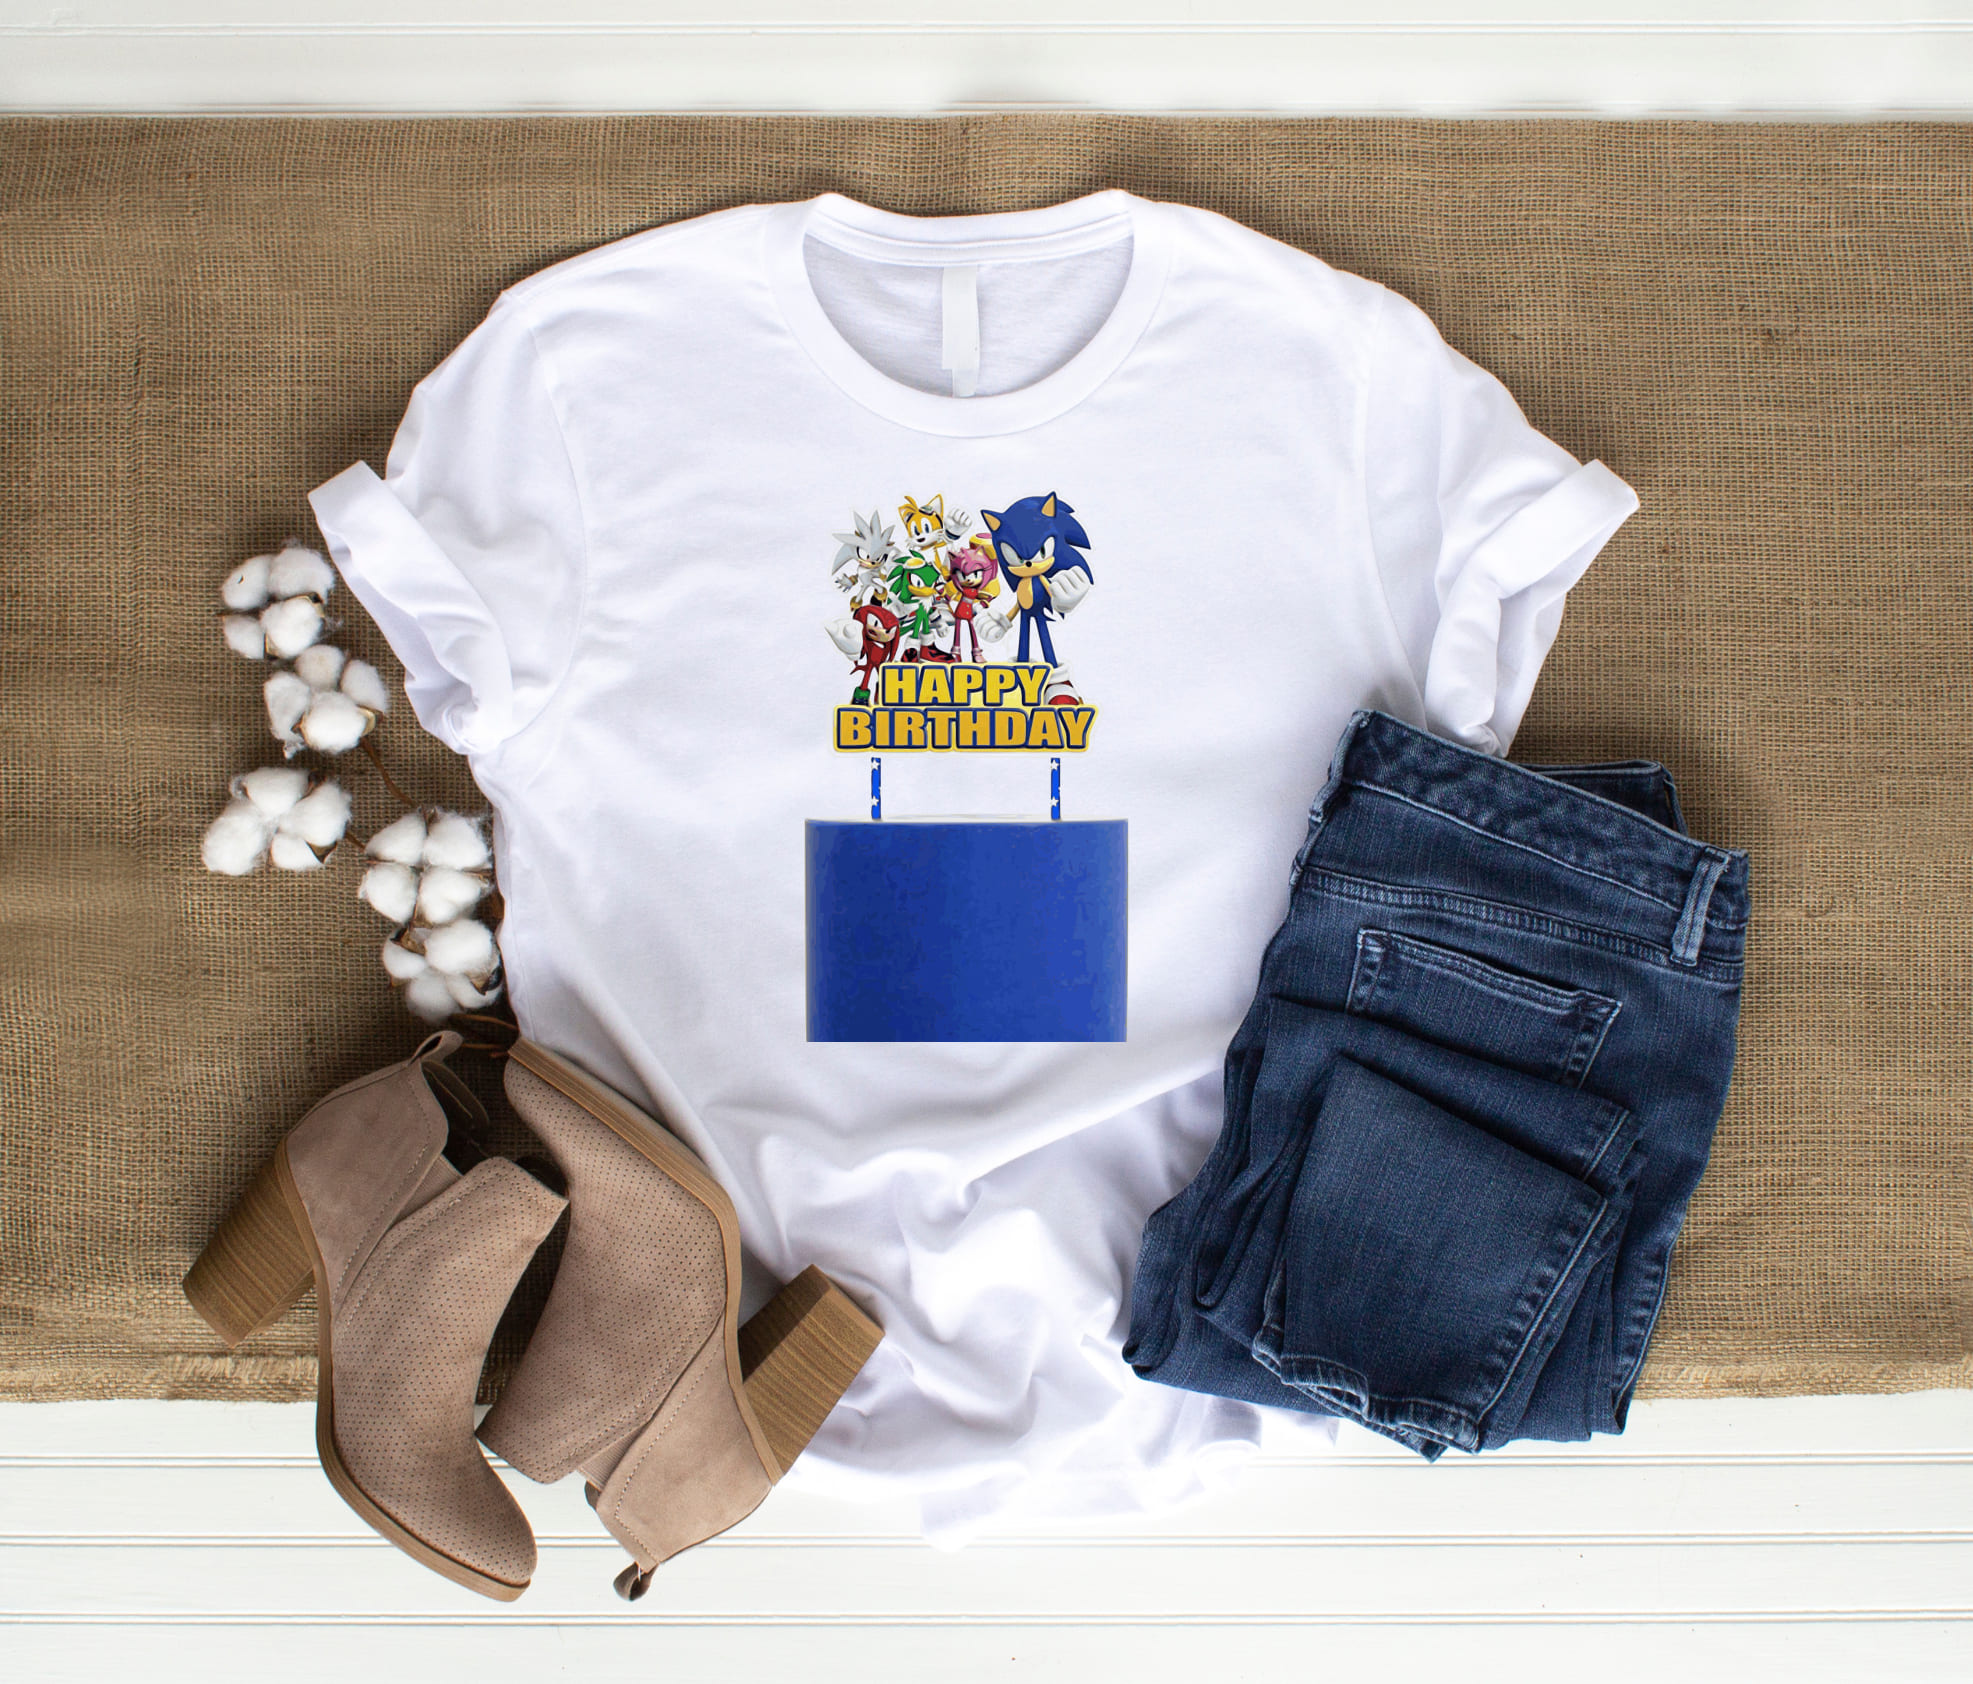 Classic white t-shirt with the minimalistic Sonic.